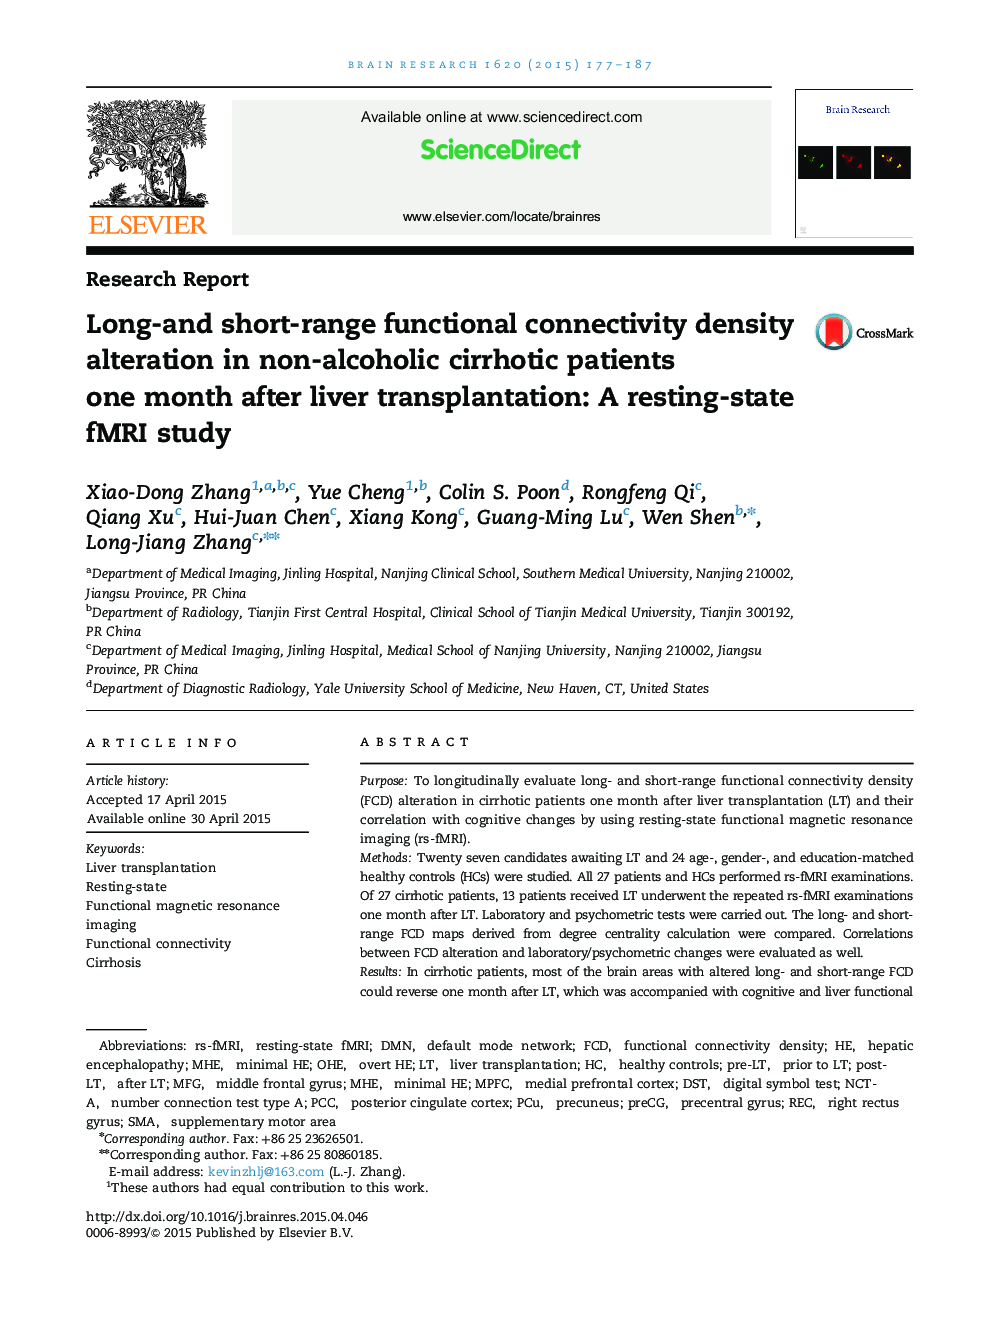 Research ReportLong-and short-range functional connectivity density alteration in non-alcoholic cirrhotic patients one month after liver transplantation: A resting-state fMRI study